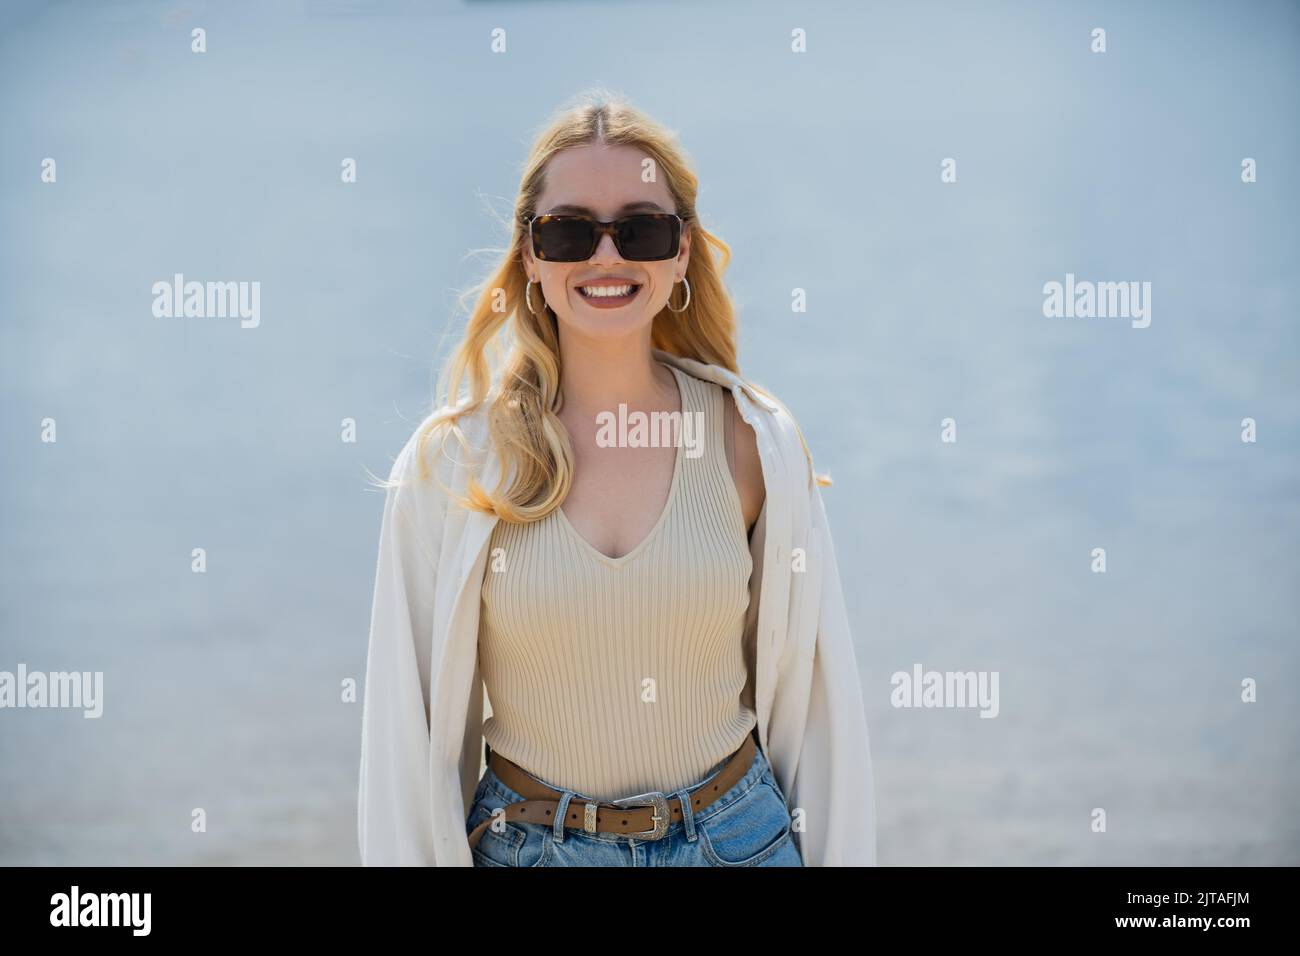 blonde and happy woman smiling at camera outdoors Stock Photo